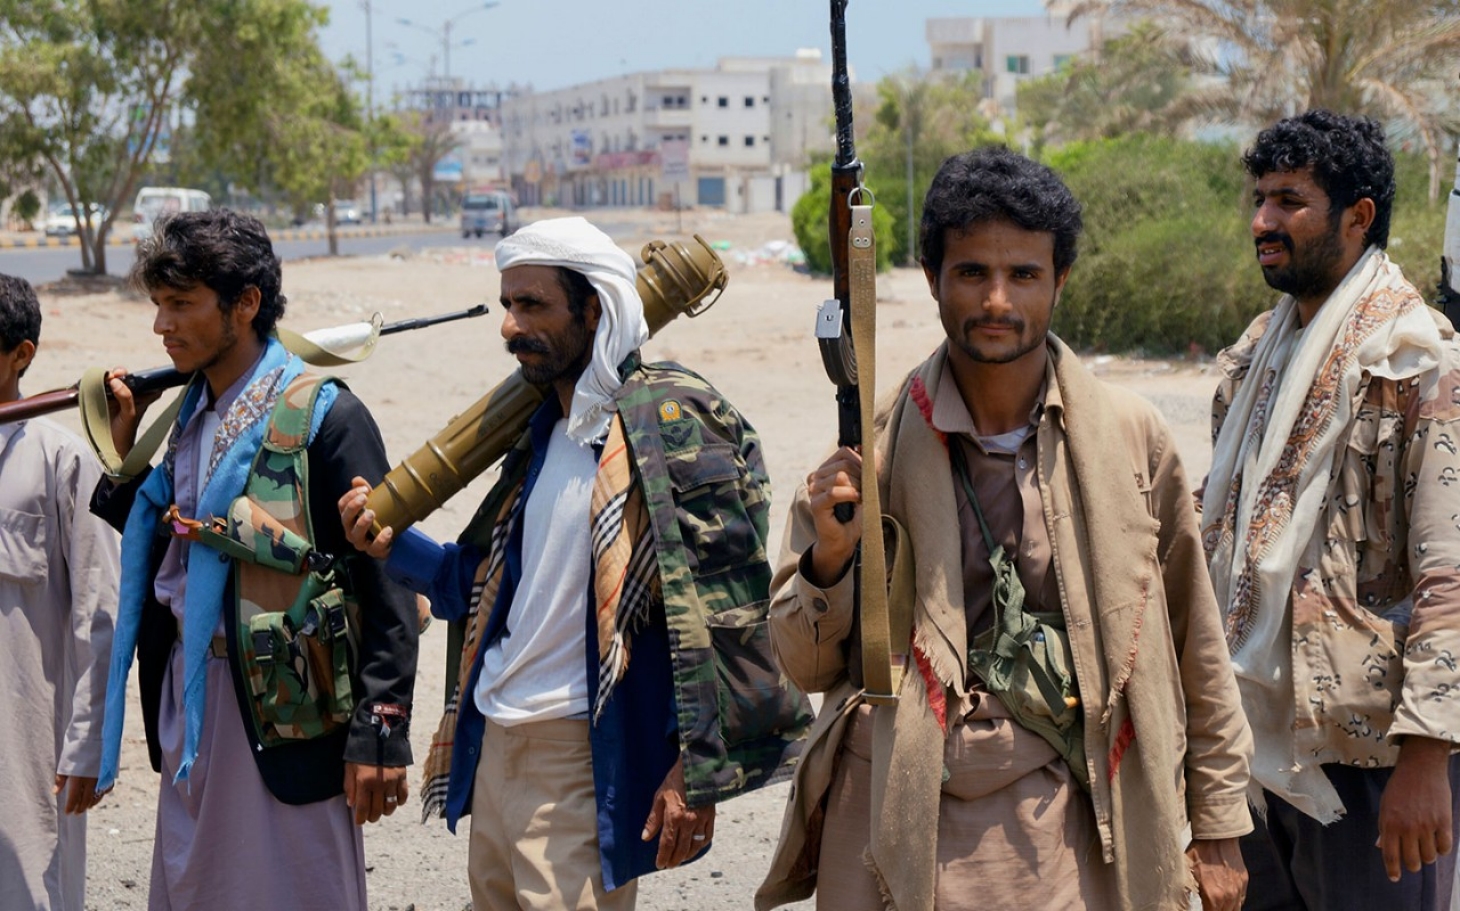 http://america.aljazeera.com/content/ajam/articles/2015/4/3/yemens-houthi-fighters-pull-back-in-central-aden-residents-officials-say/jcr:content/headlineImage.adapt.1460.high.yemen_houthi_aden_0403.1428076769292.jpg